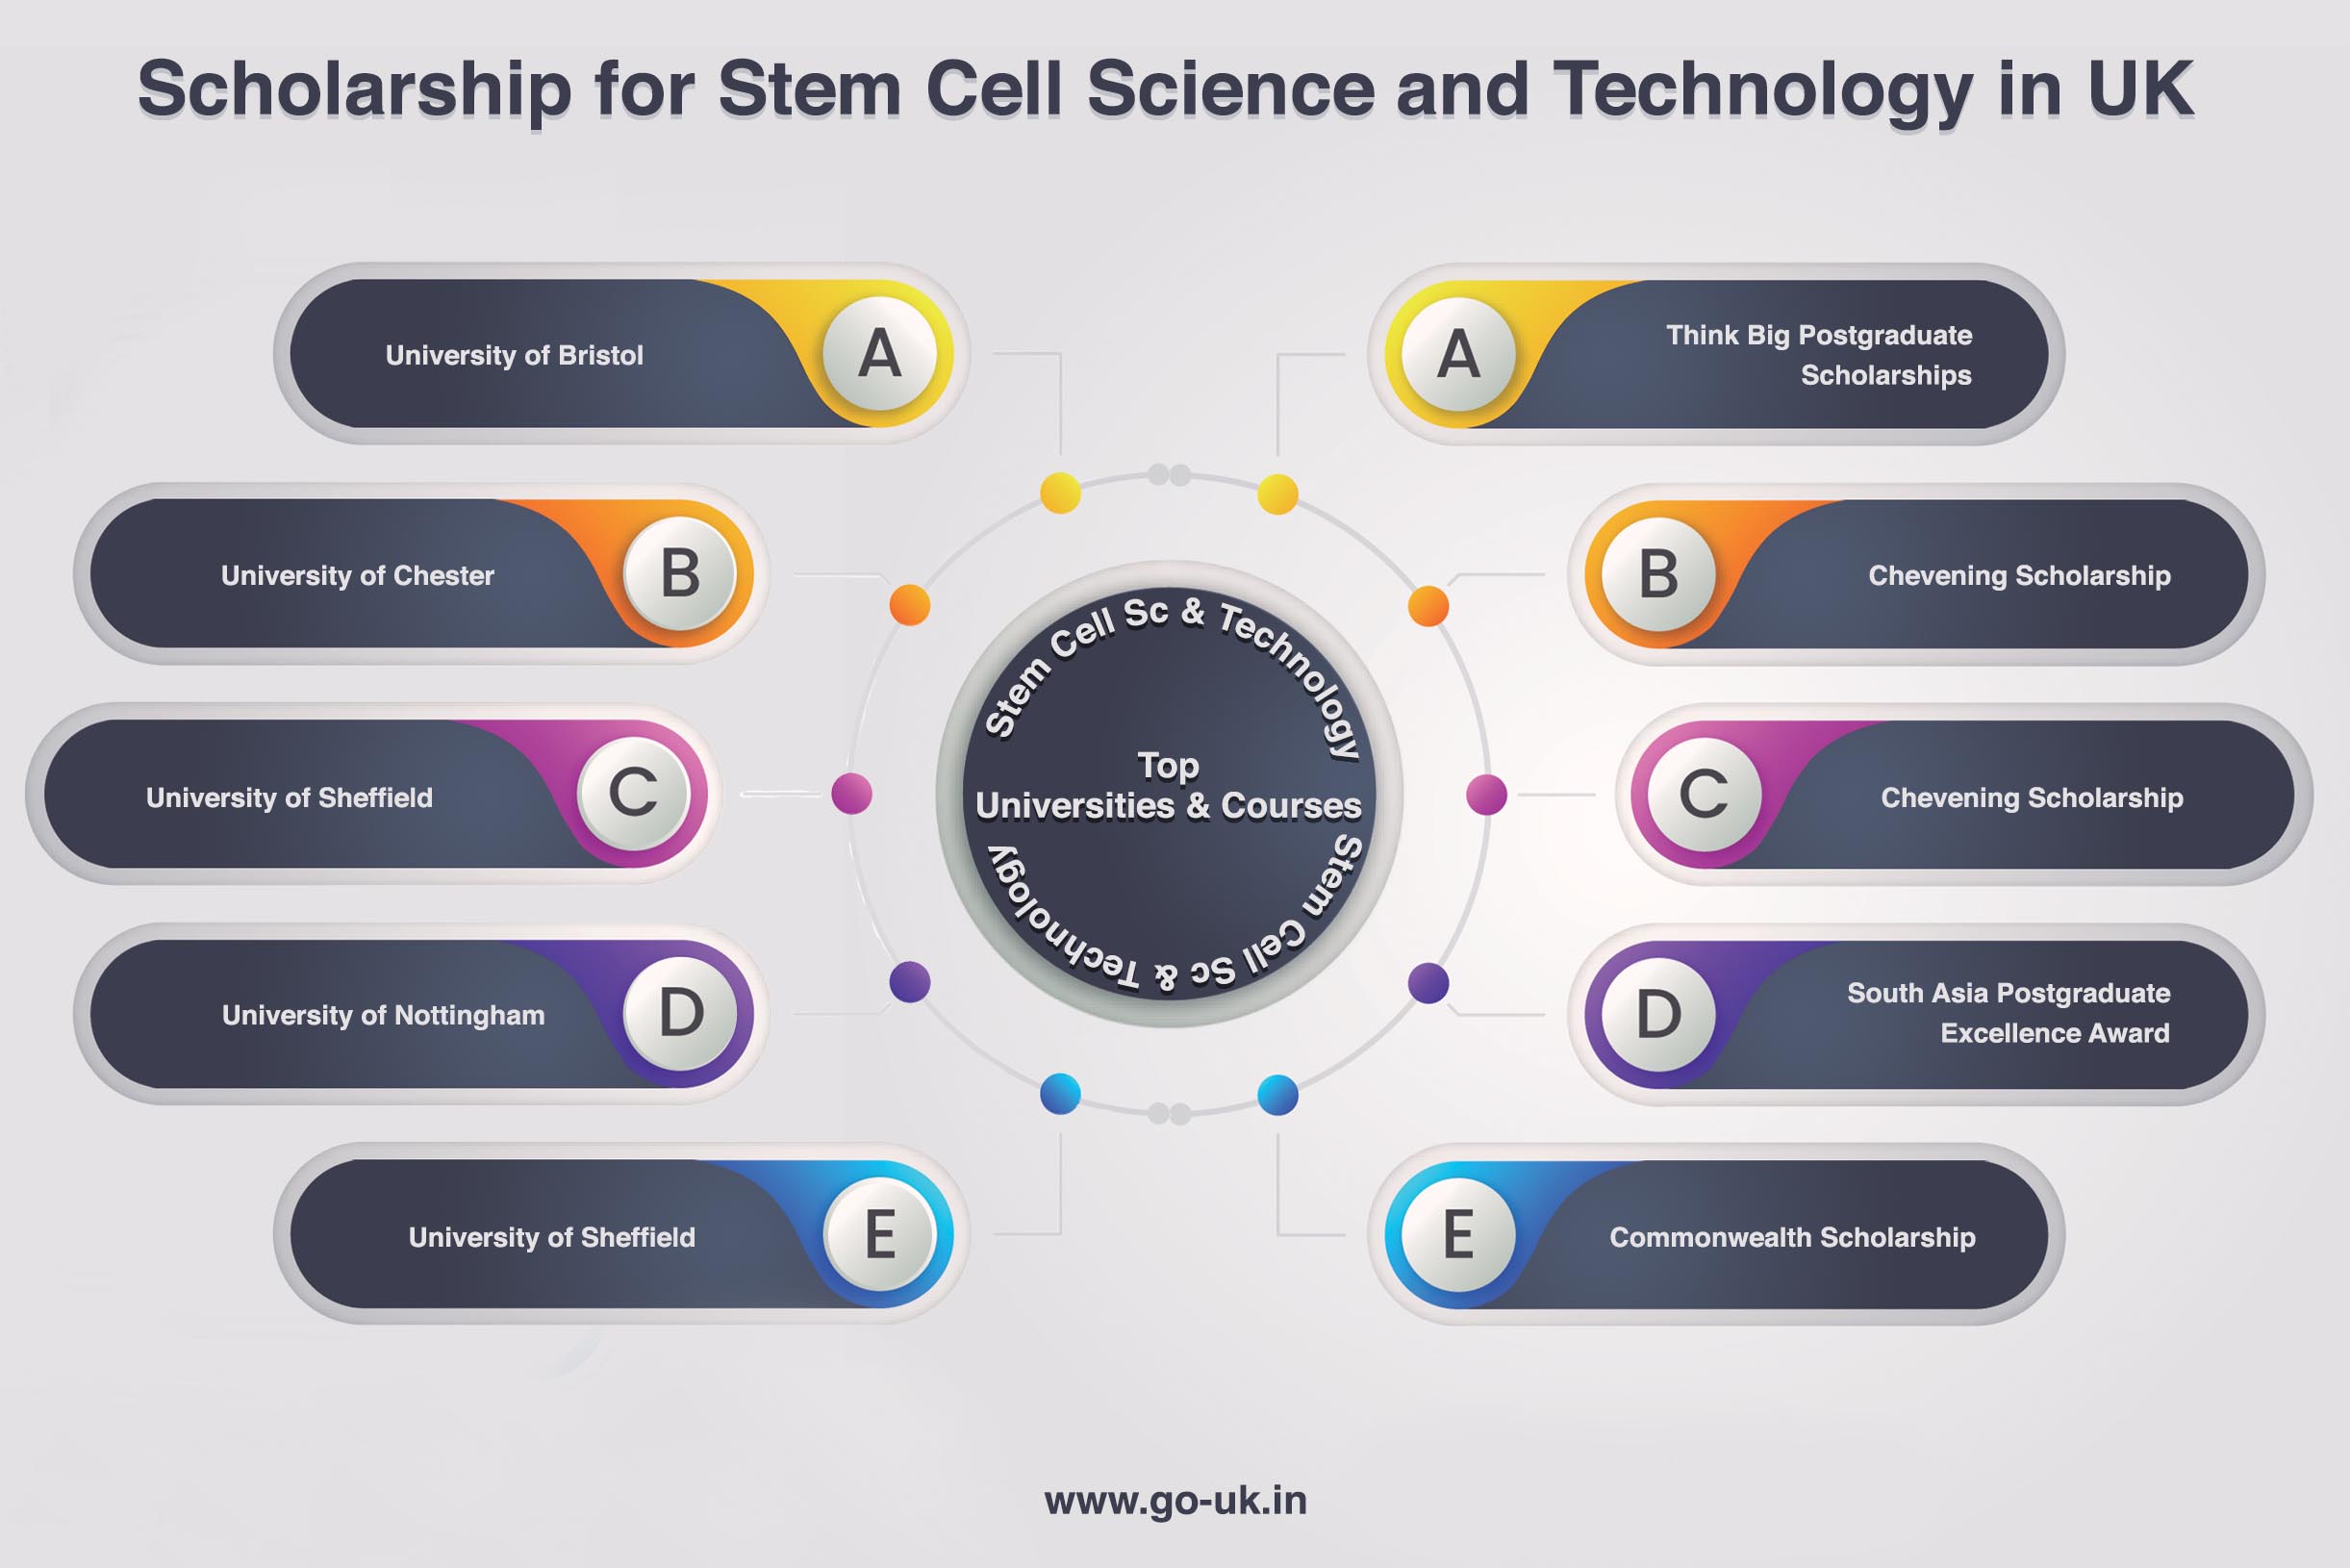 Scholarships for Stem Cell Science and Technology in UK